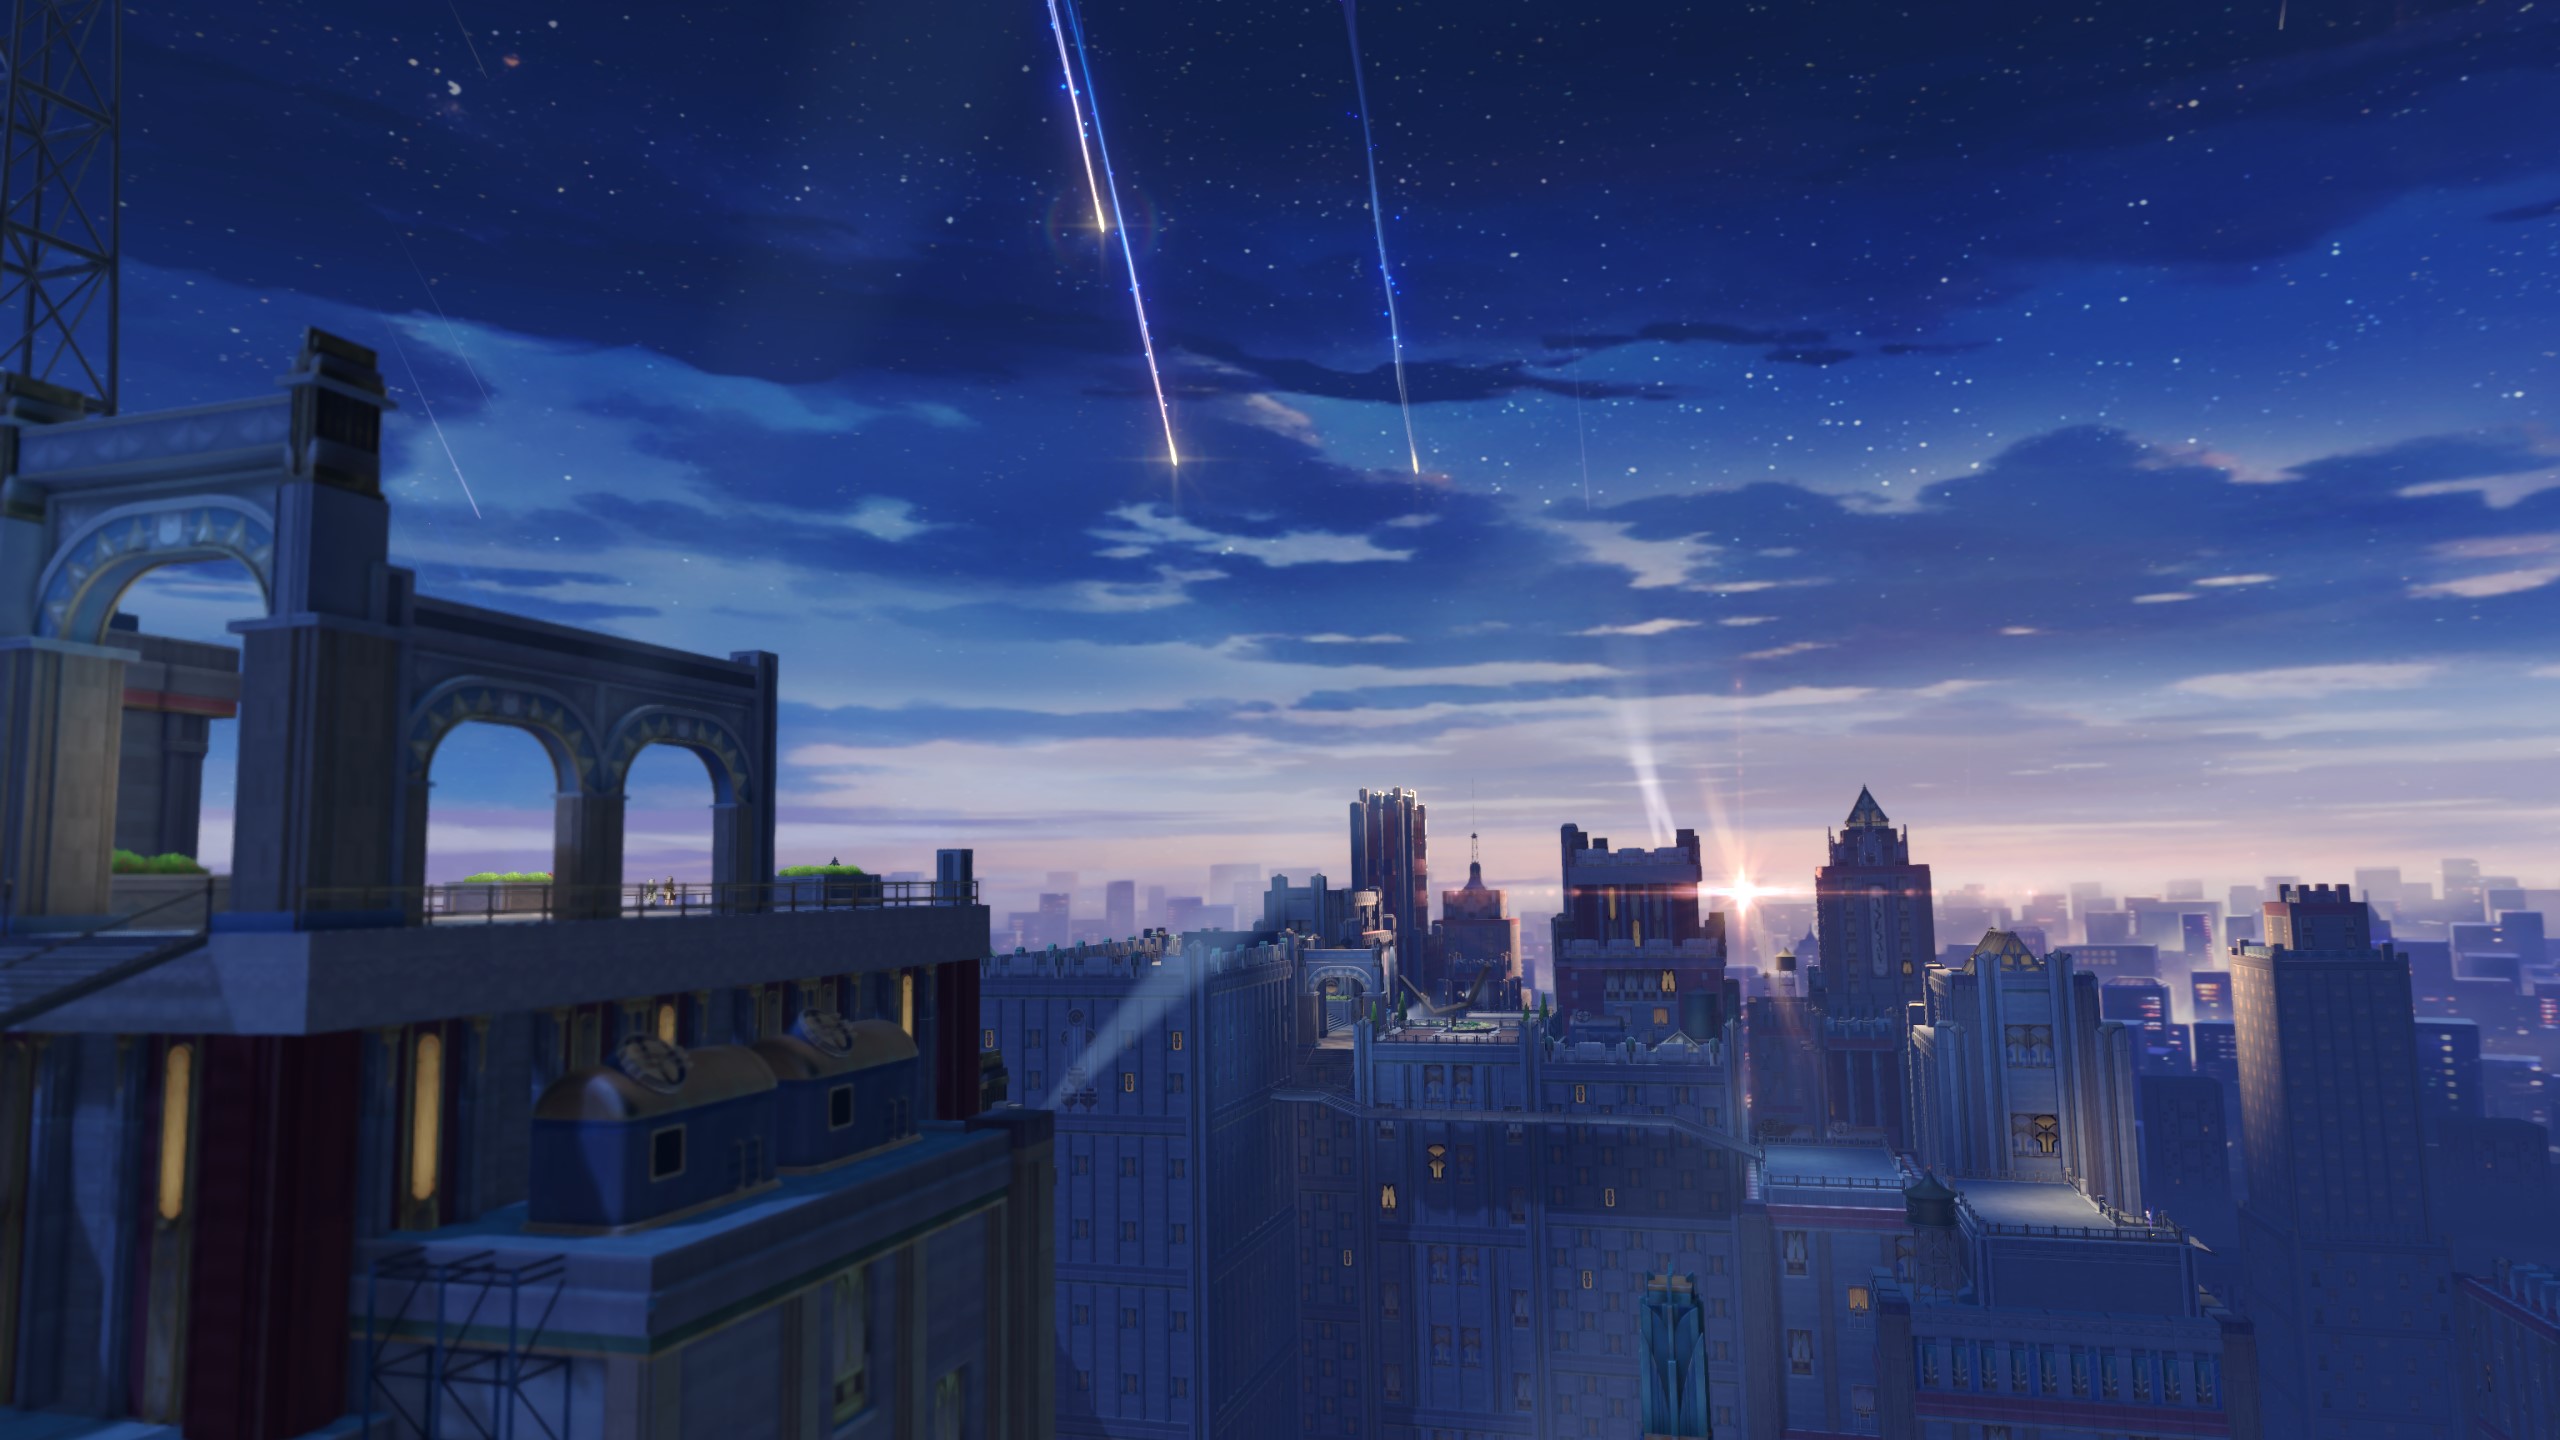 Penacony view on top of building with shooting stars against sunset sky